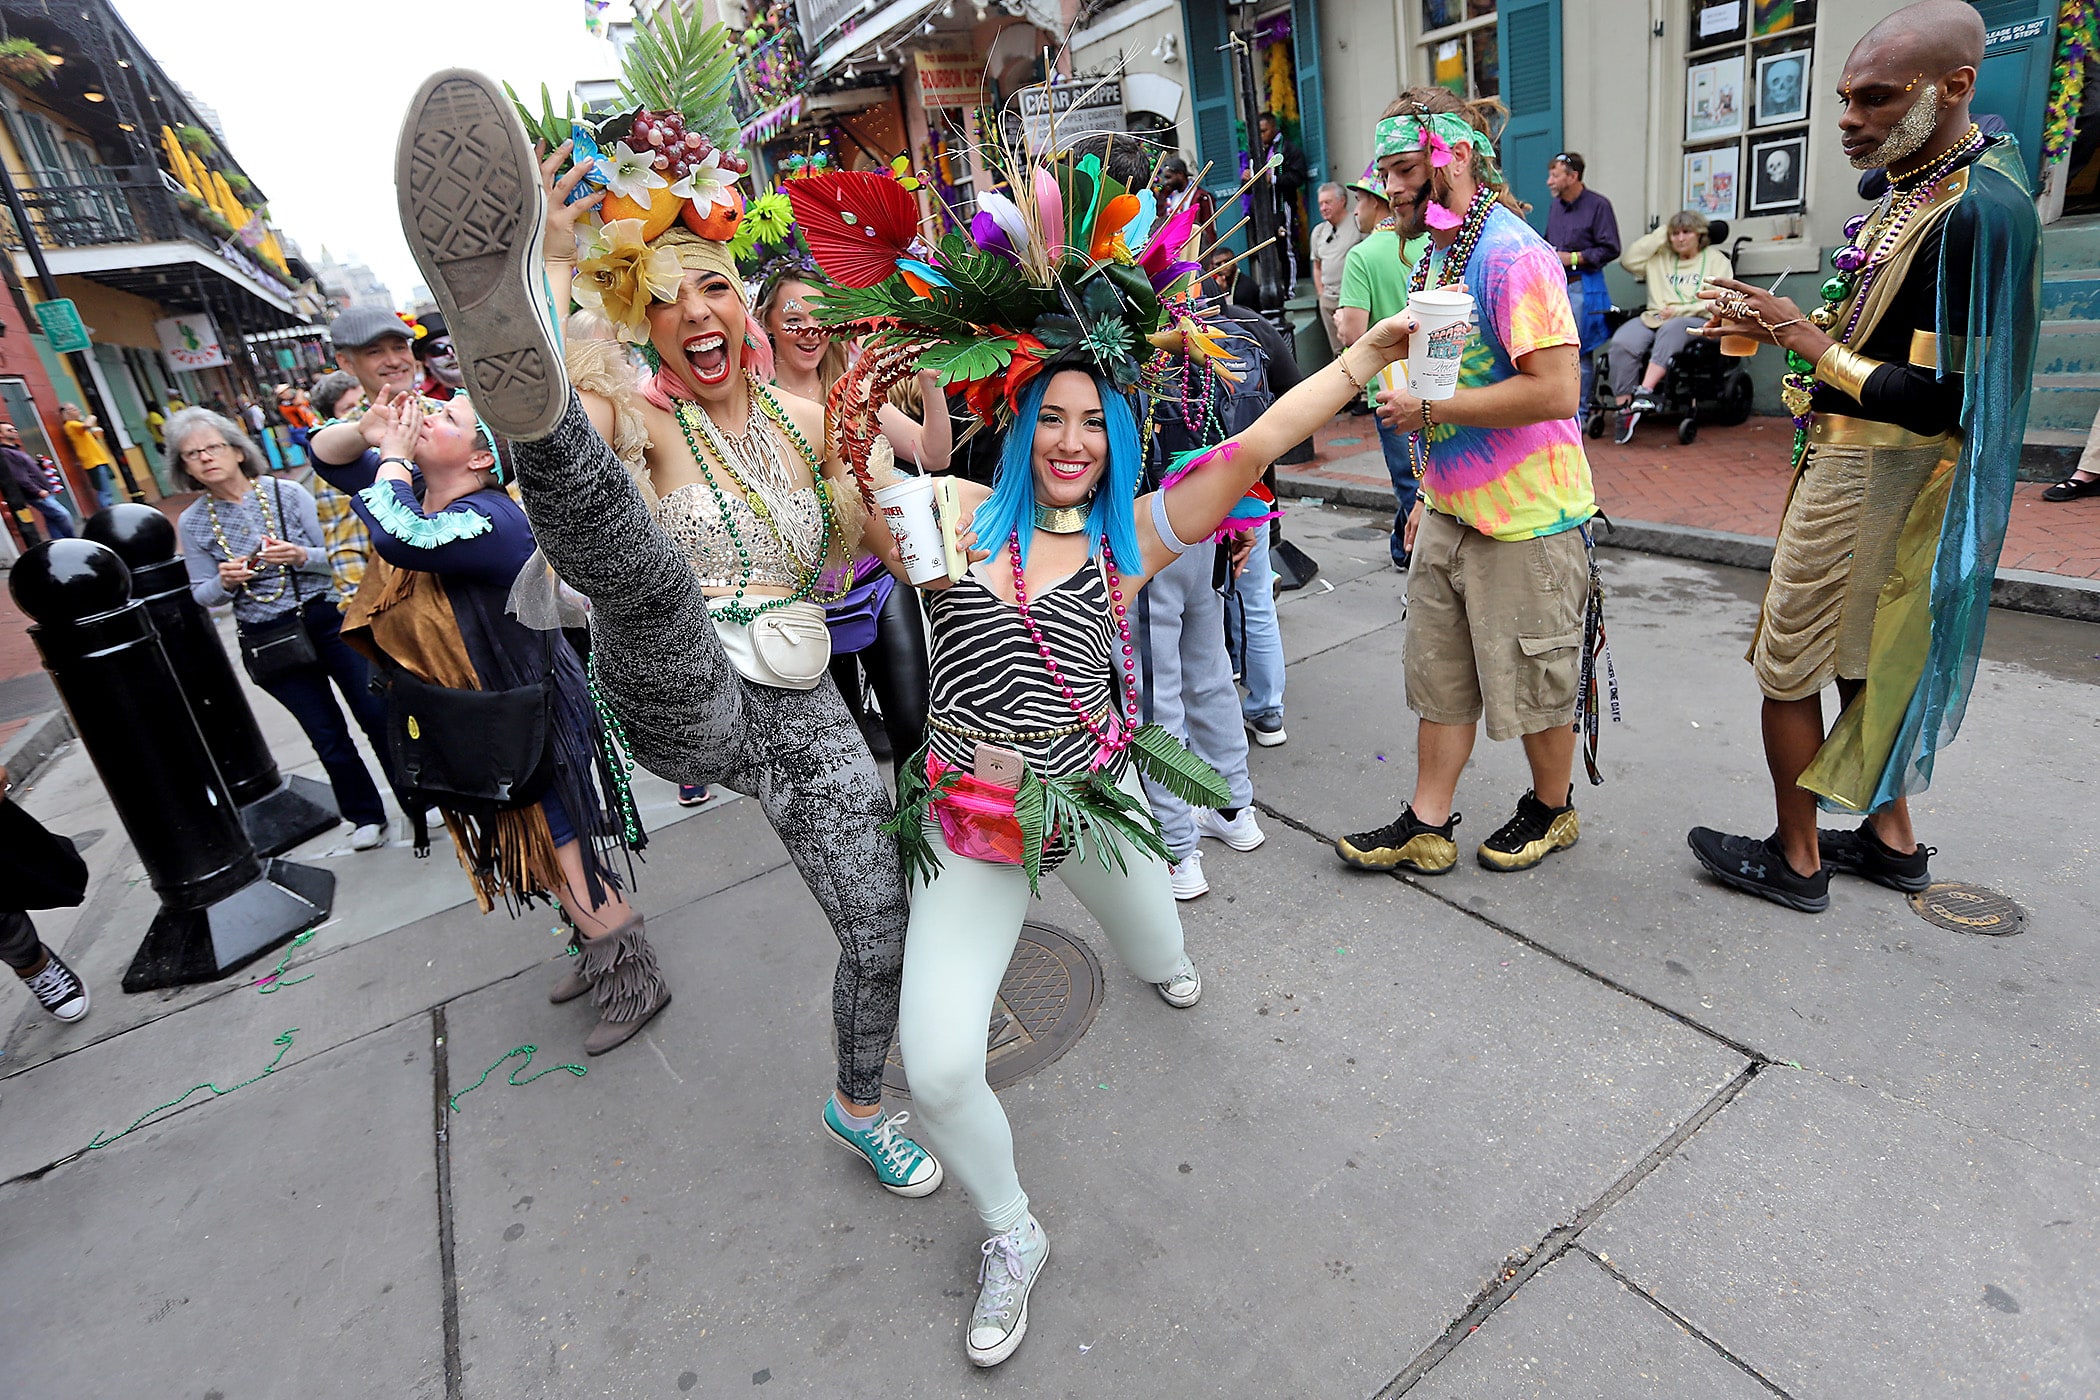 Revelers dress up and join the mayhem in the French Quarter on Mardi Gras Day, 2020. (Photo by Michael DeMocker)